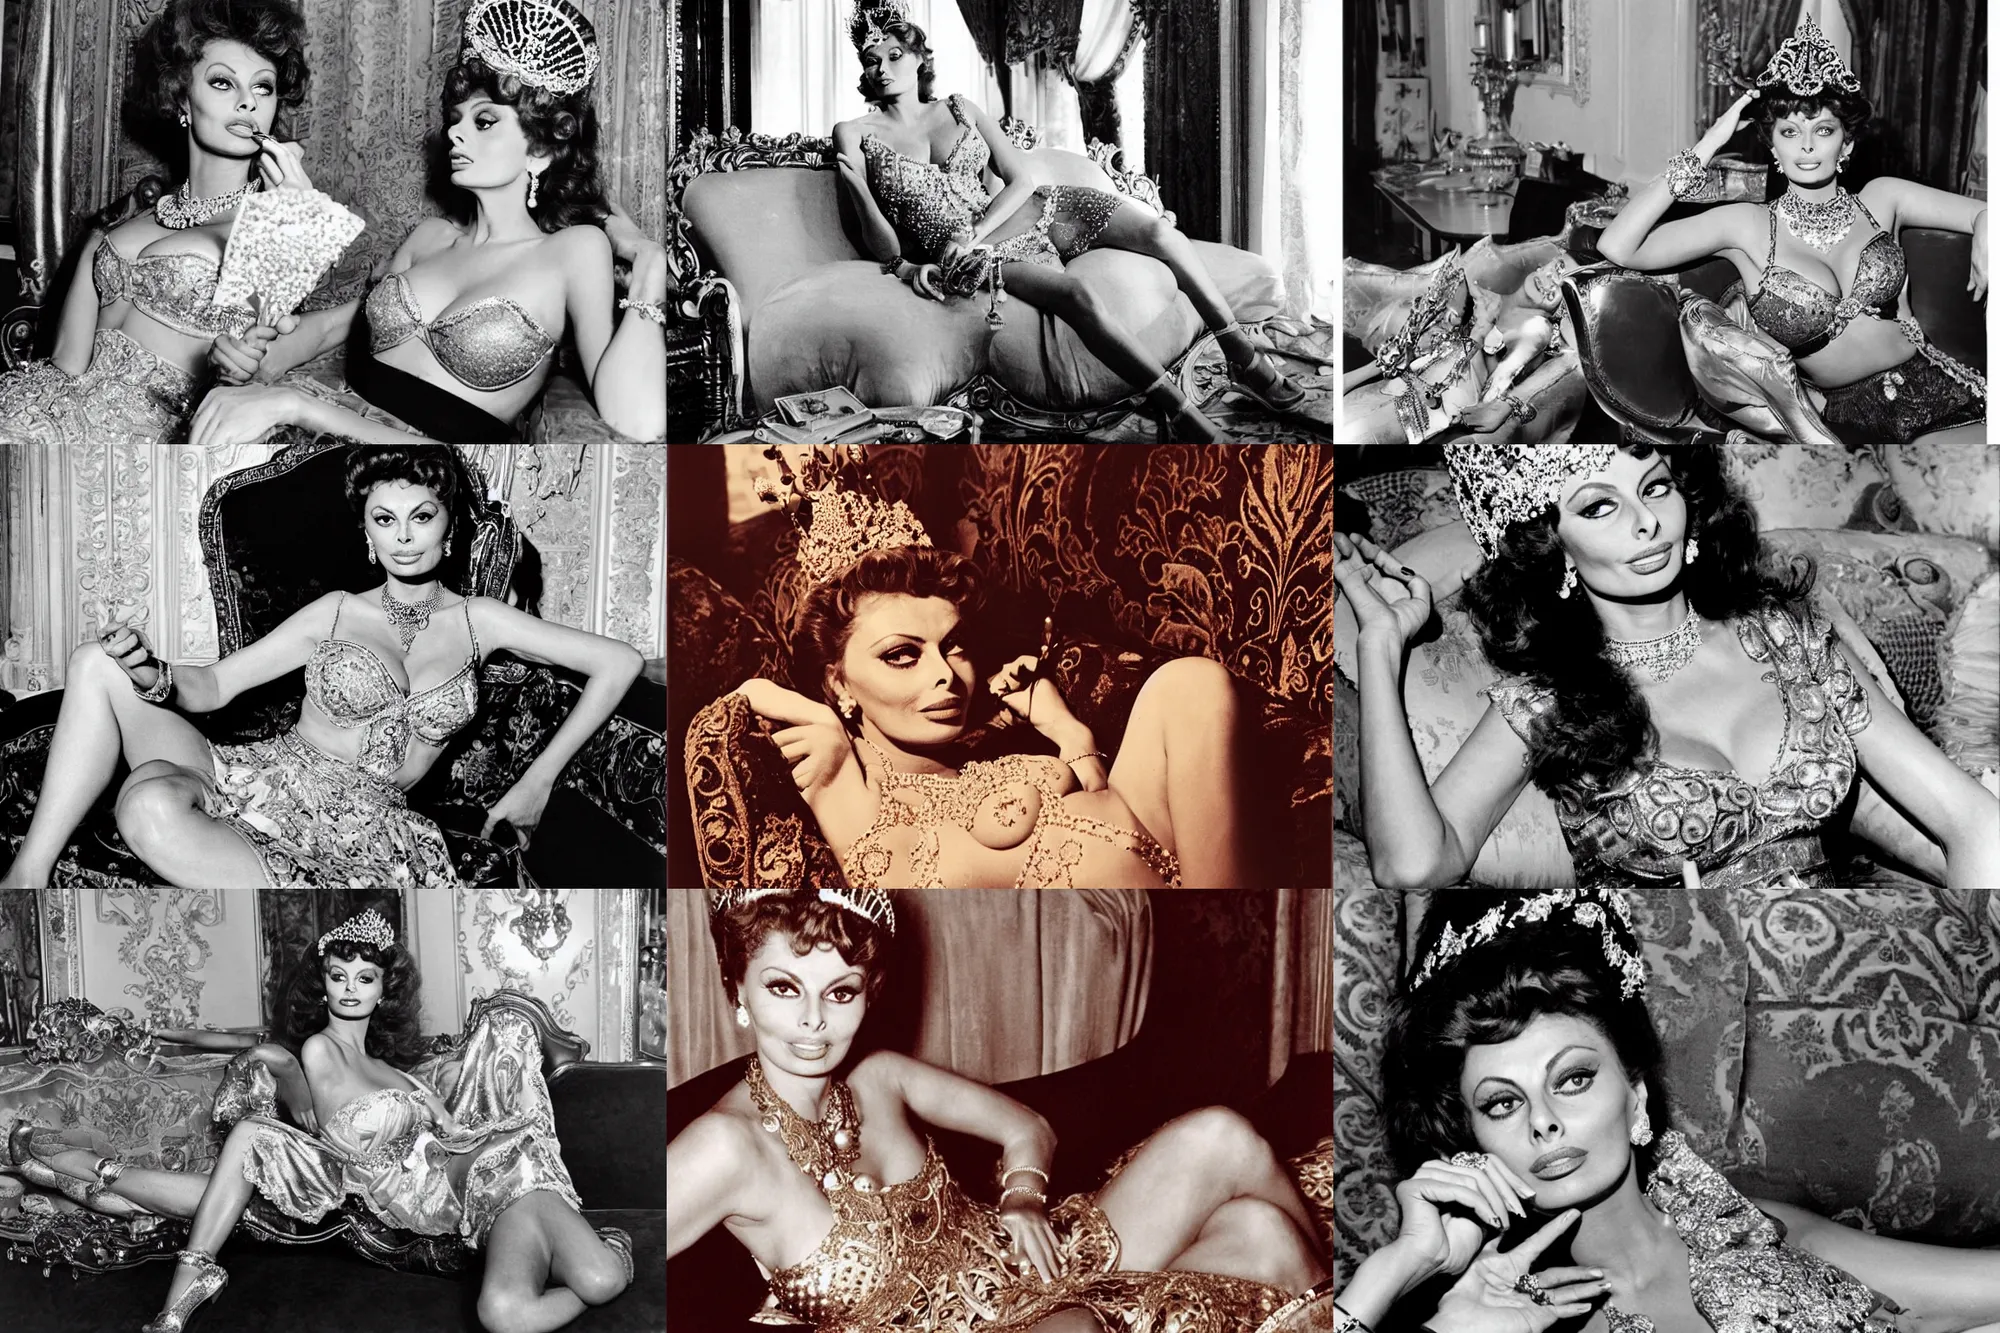 Prompt: young sophia loren having pizza, relaxed pose on antique luxury sofa, intricate ornamented tiara, opulent pearl necklace, laced dress, golden lighting, burlesque photo by letizia battaglia